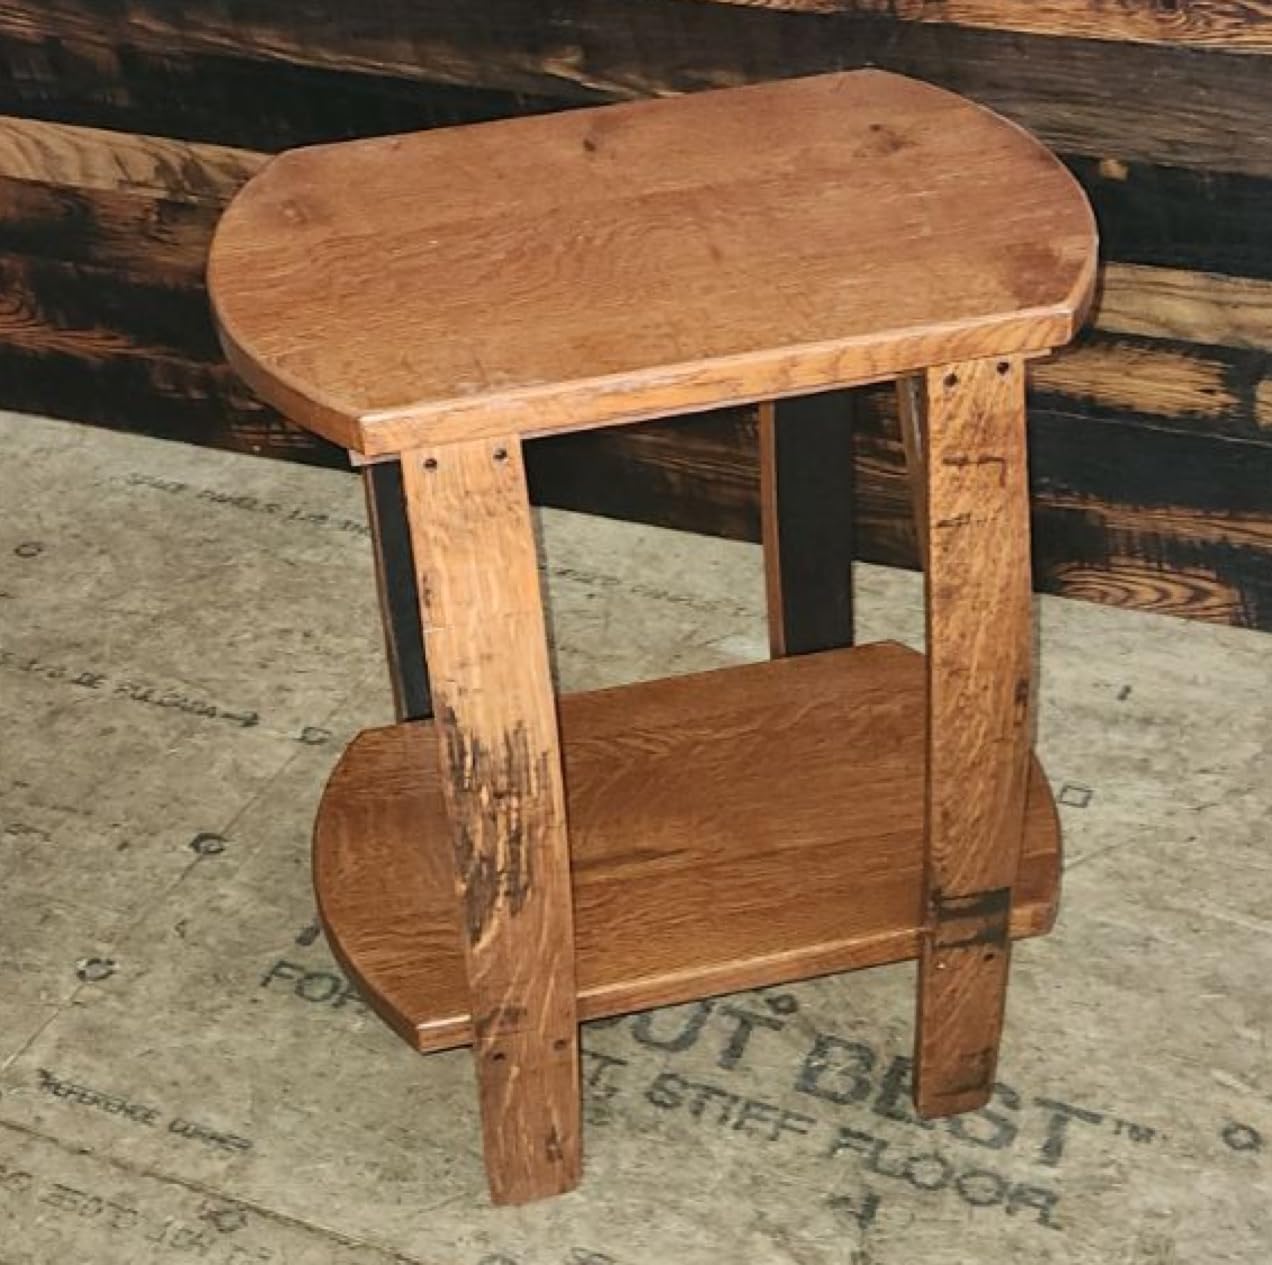 William Sheppee Whiskey Barrel End Table Shooters Amish Handcrafted